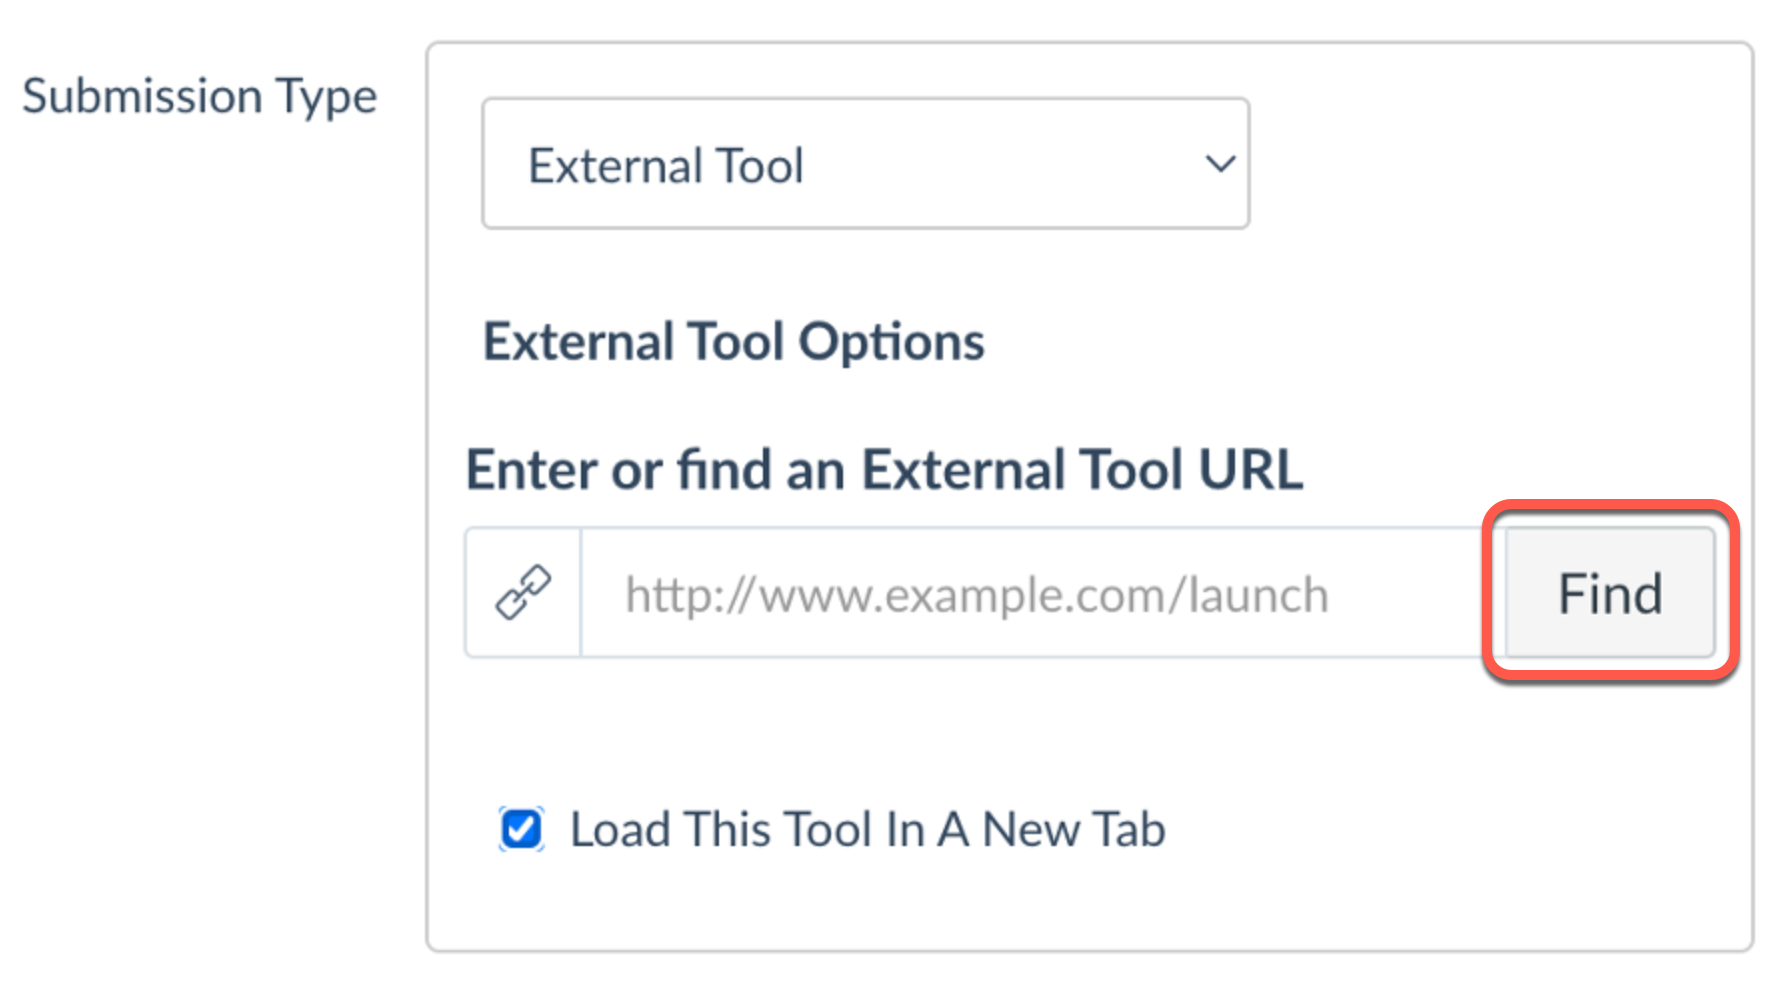 Choose External Tool as the submission type and click Find